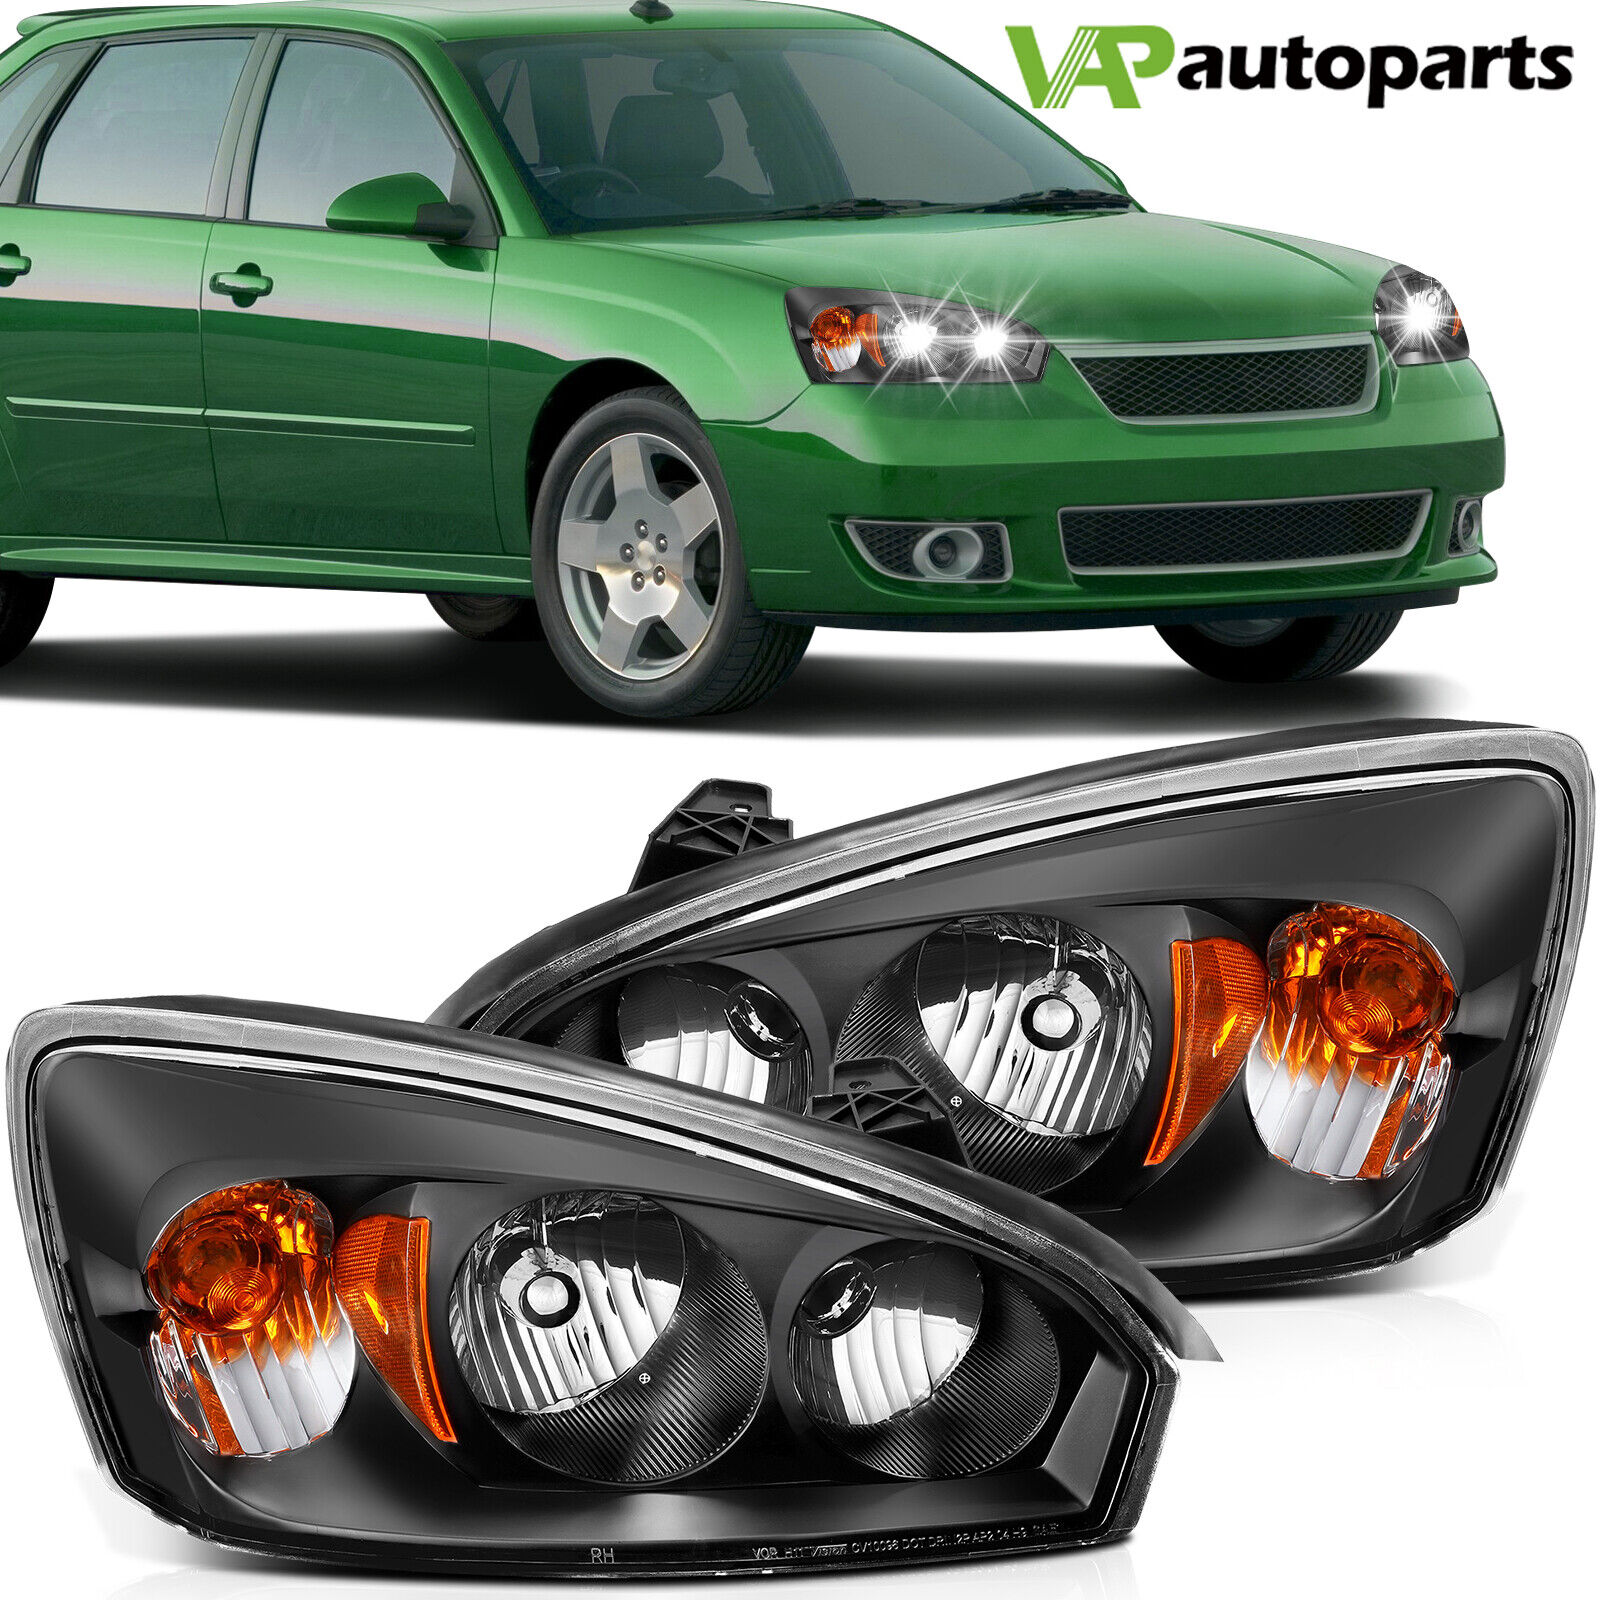 For 2004-2008 Chevy Malibu Replacement Headlights Assembly Pair Left+Right Lamp